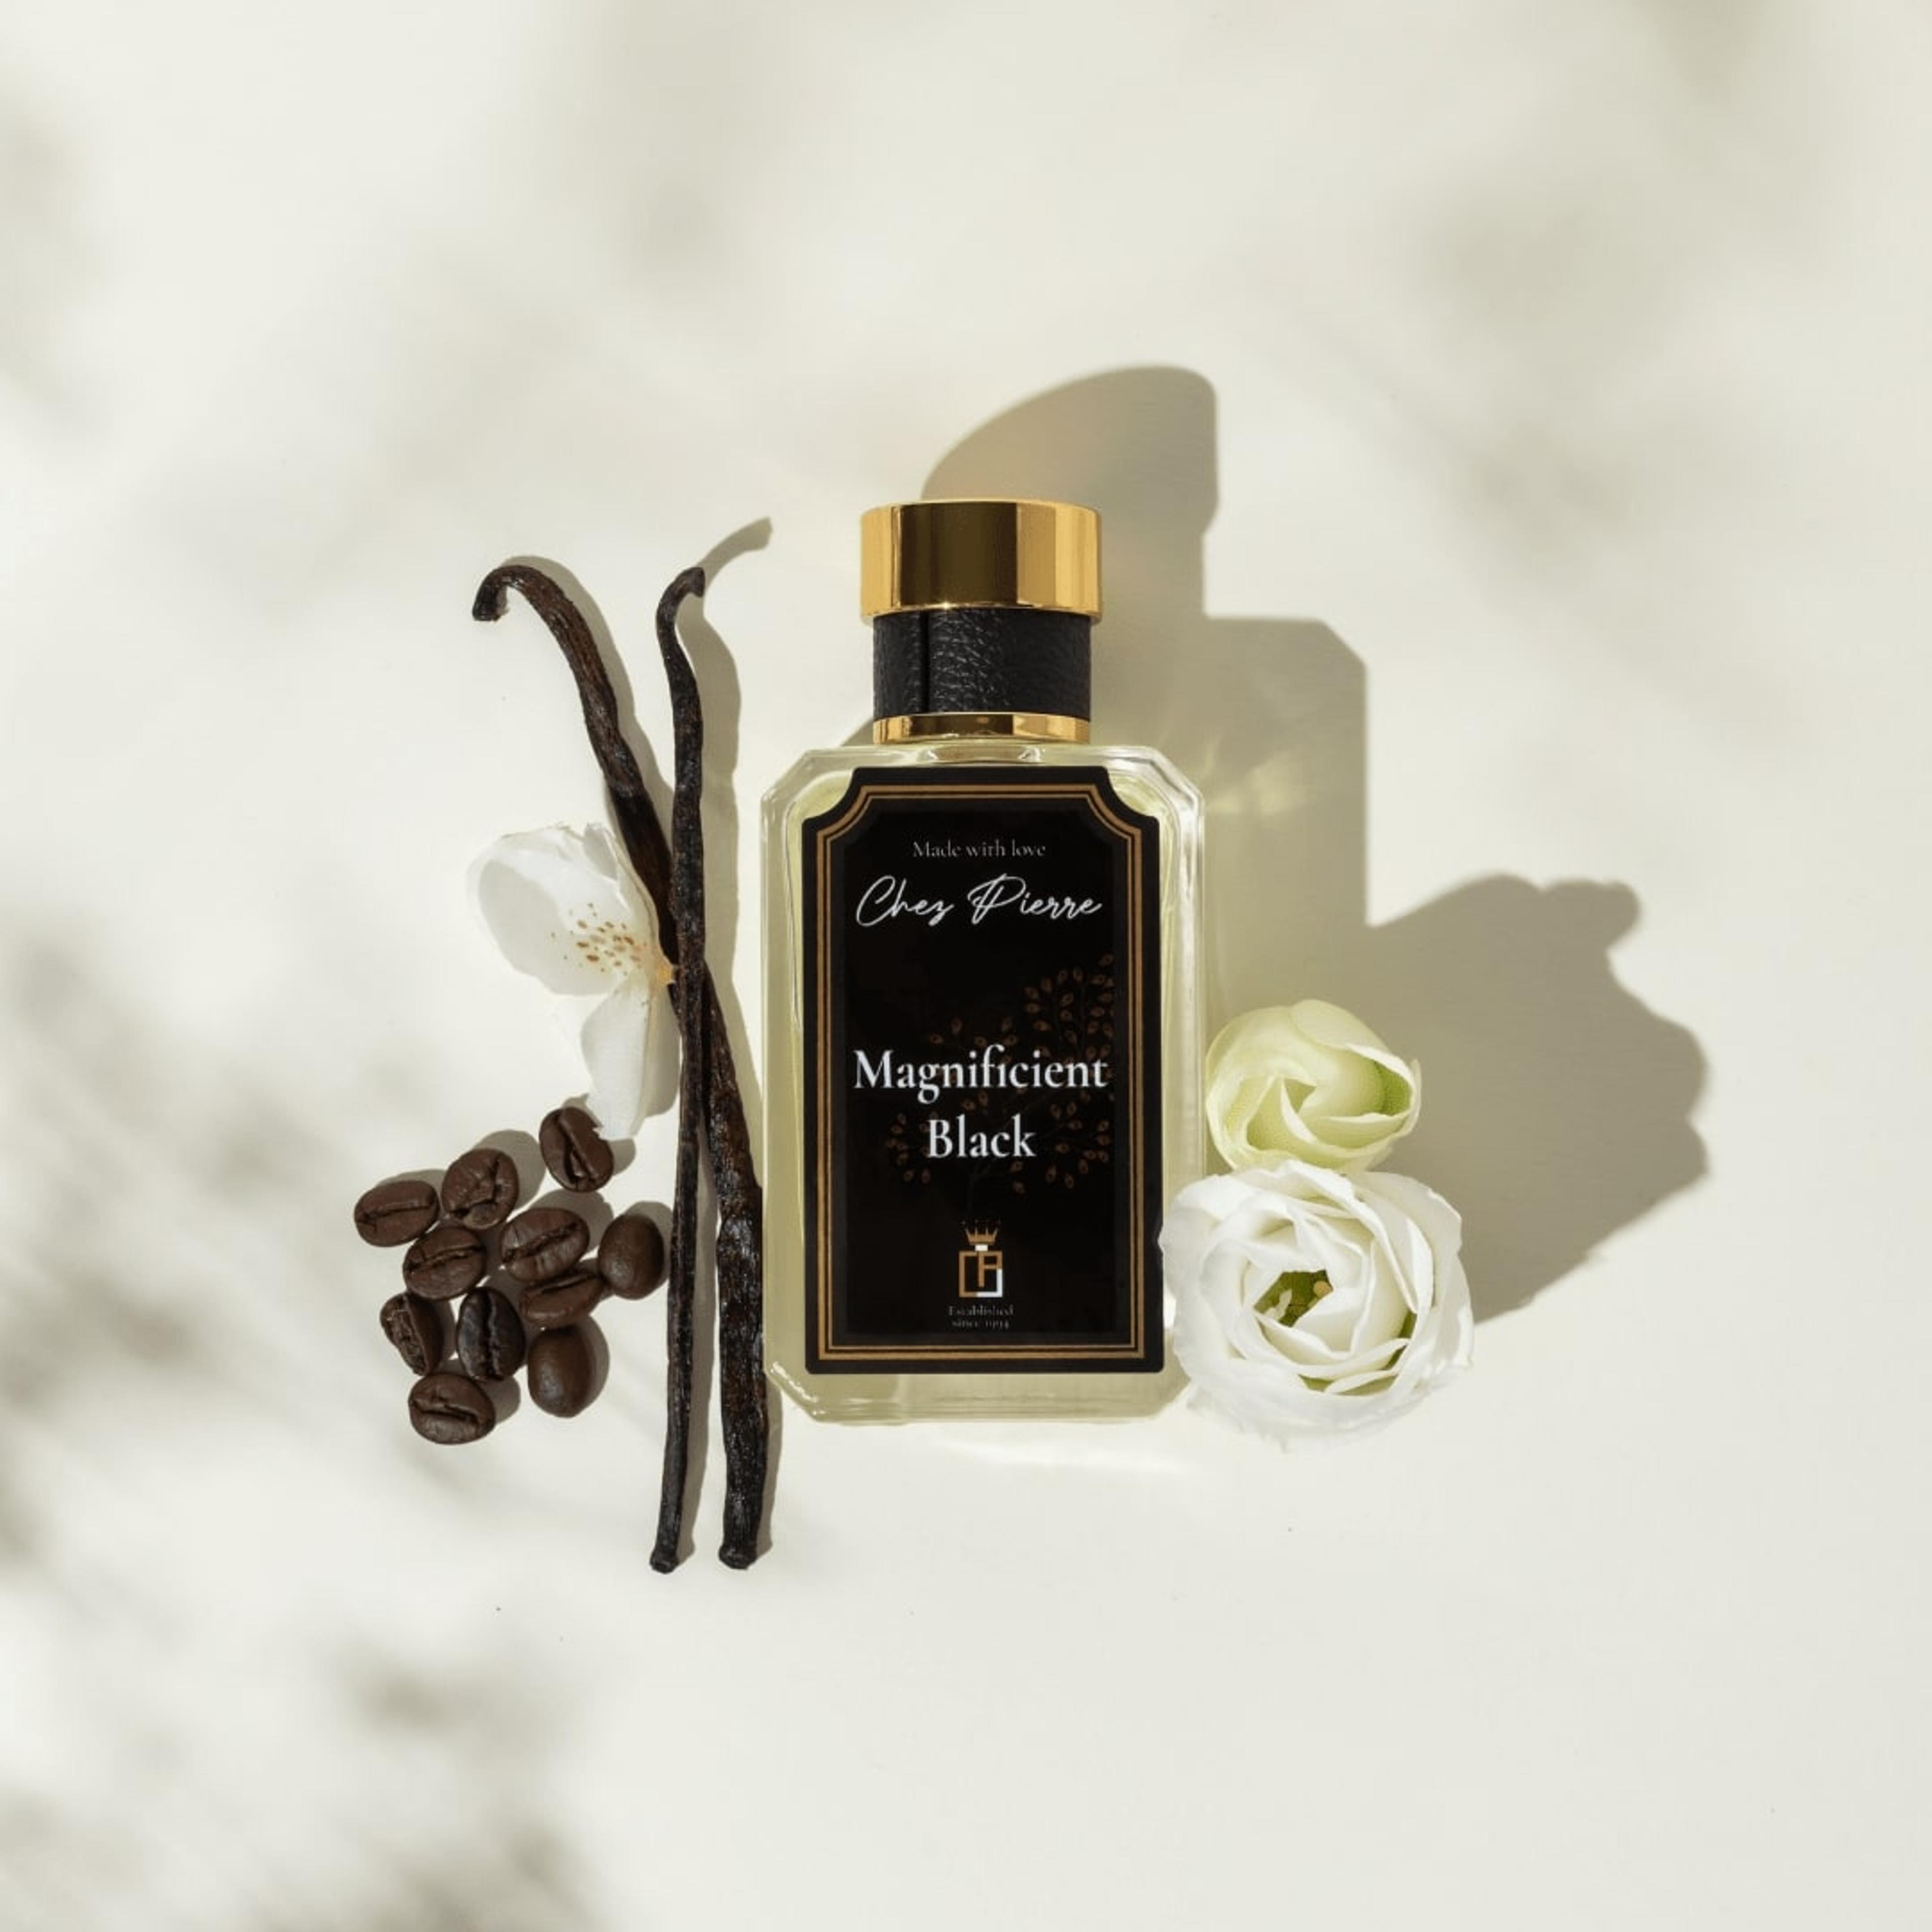 Chez Pierre's Magnificent Black Perfume Inspired By Black Opium